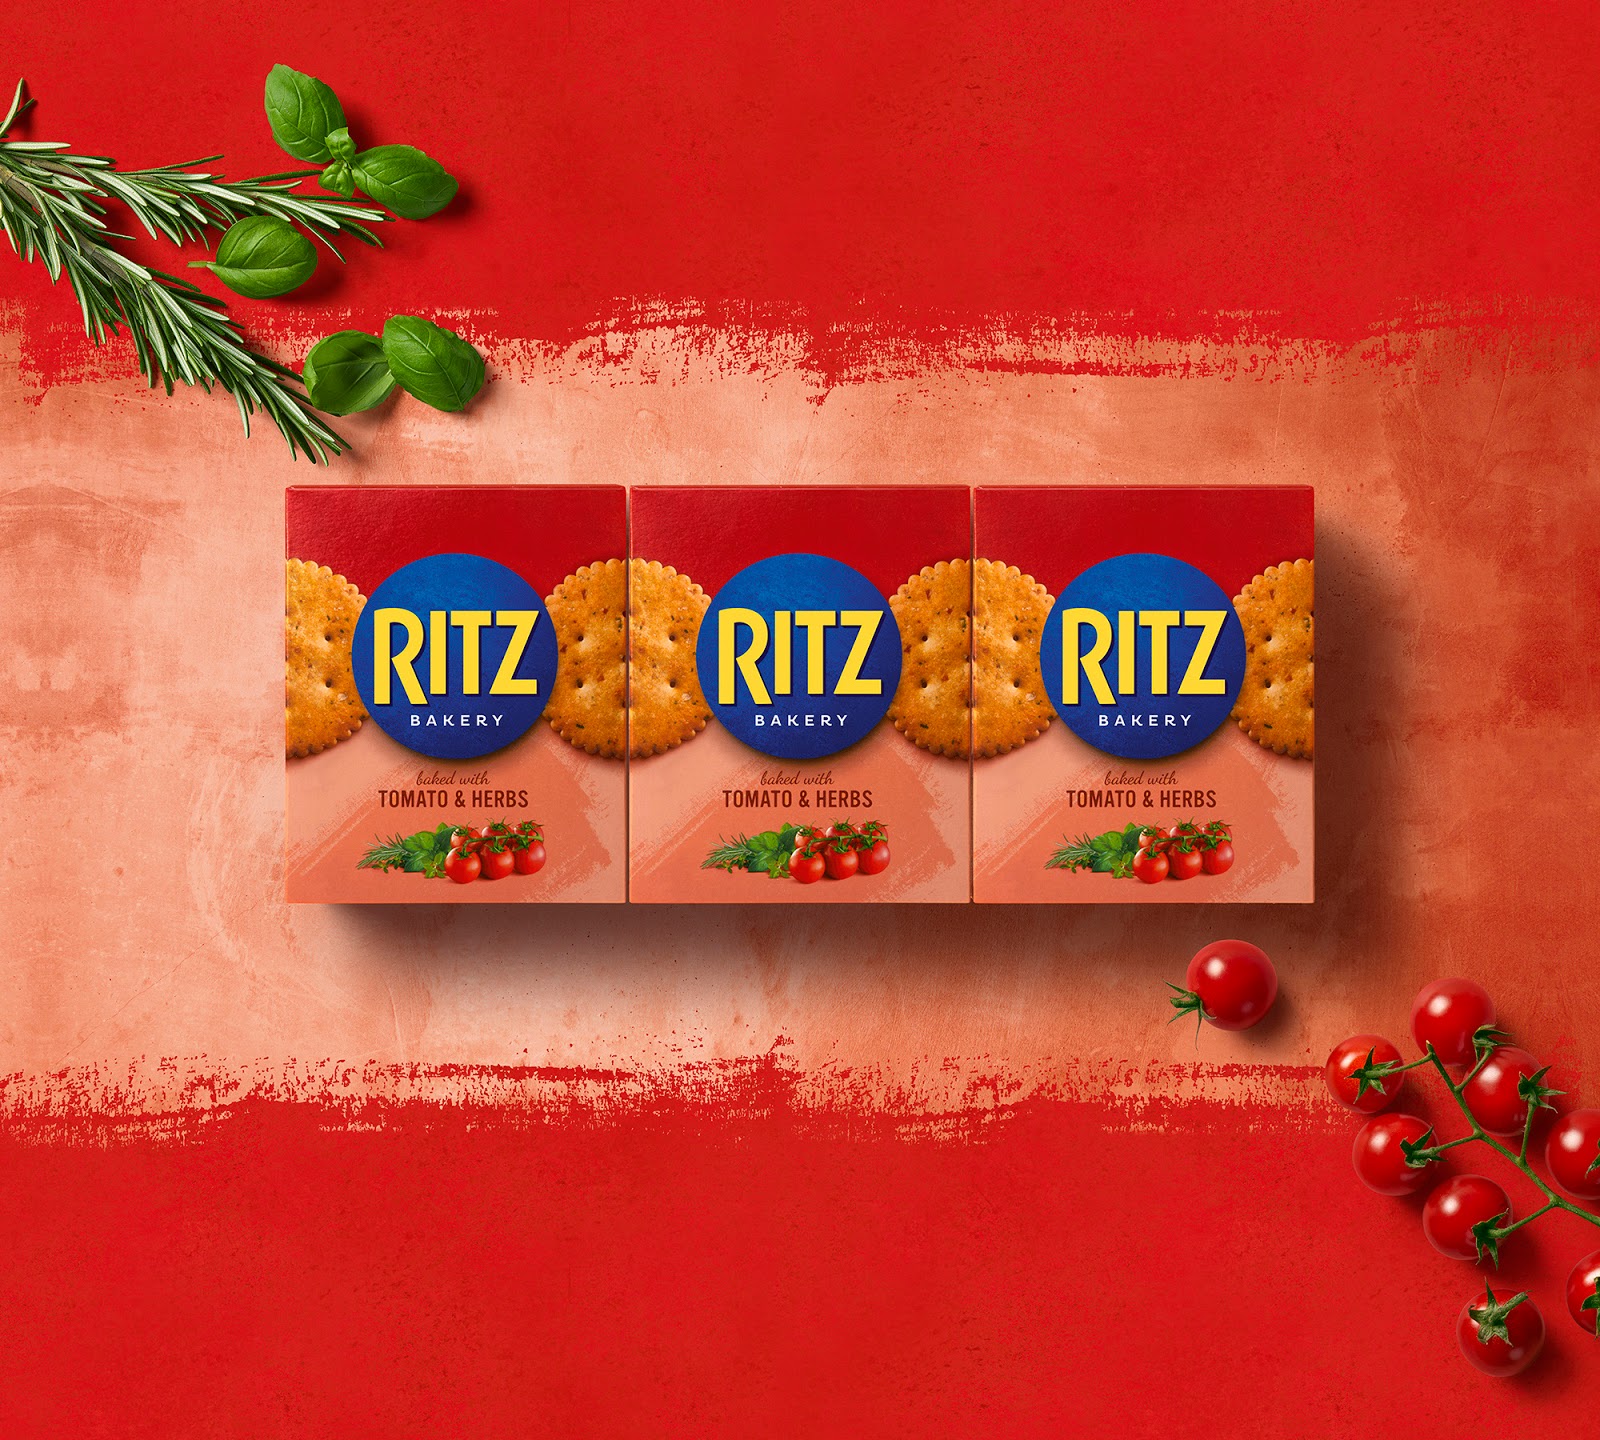 Ritz Cookie Redesign Provides A Homey Touch